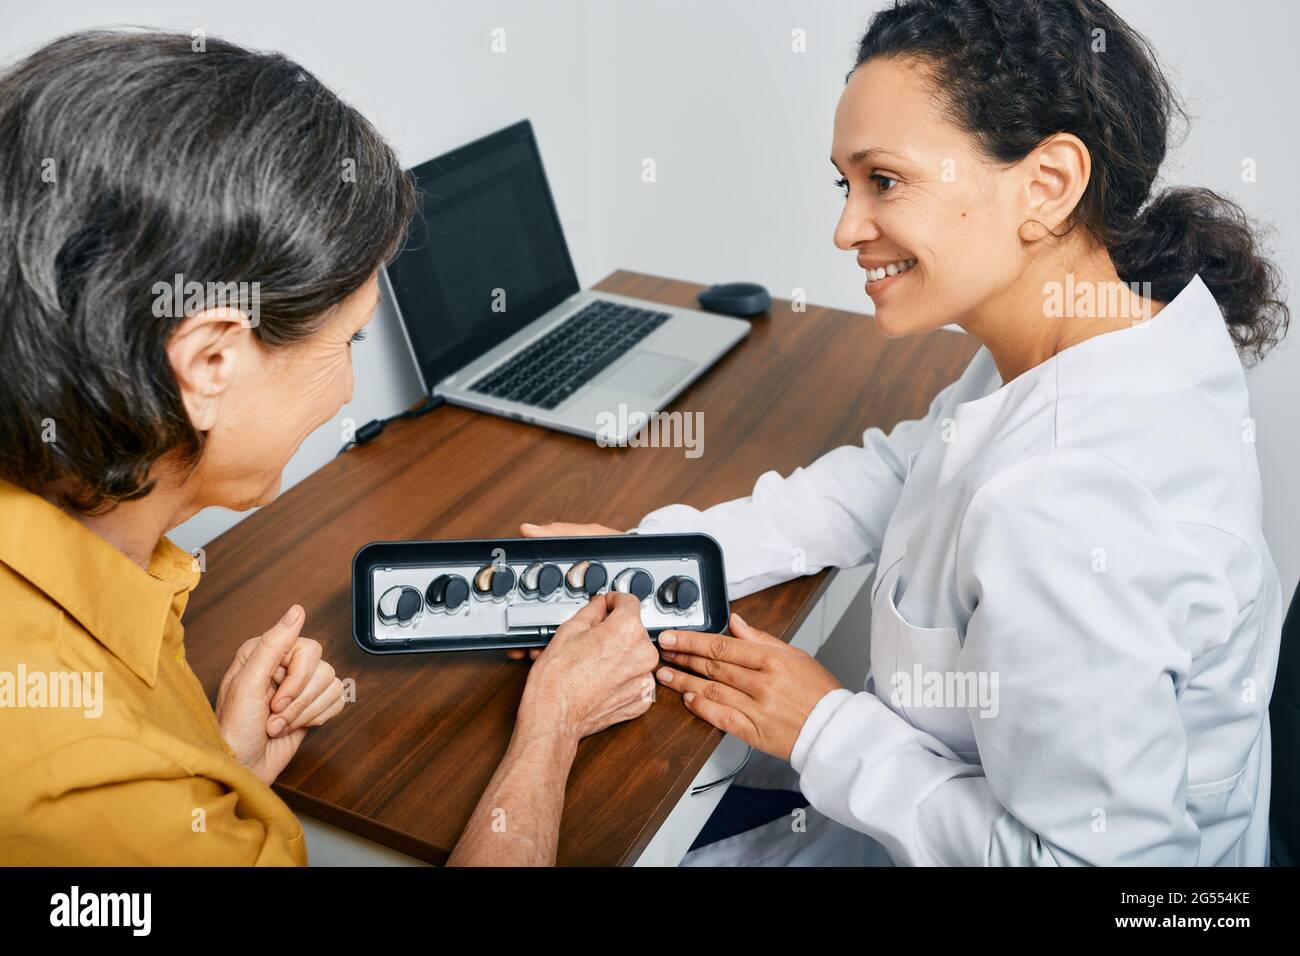 Hearing aids. Audiologist selects hearing aids for a mature woman patient to treat hearing loss at medical clinic Stock Photo